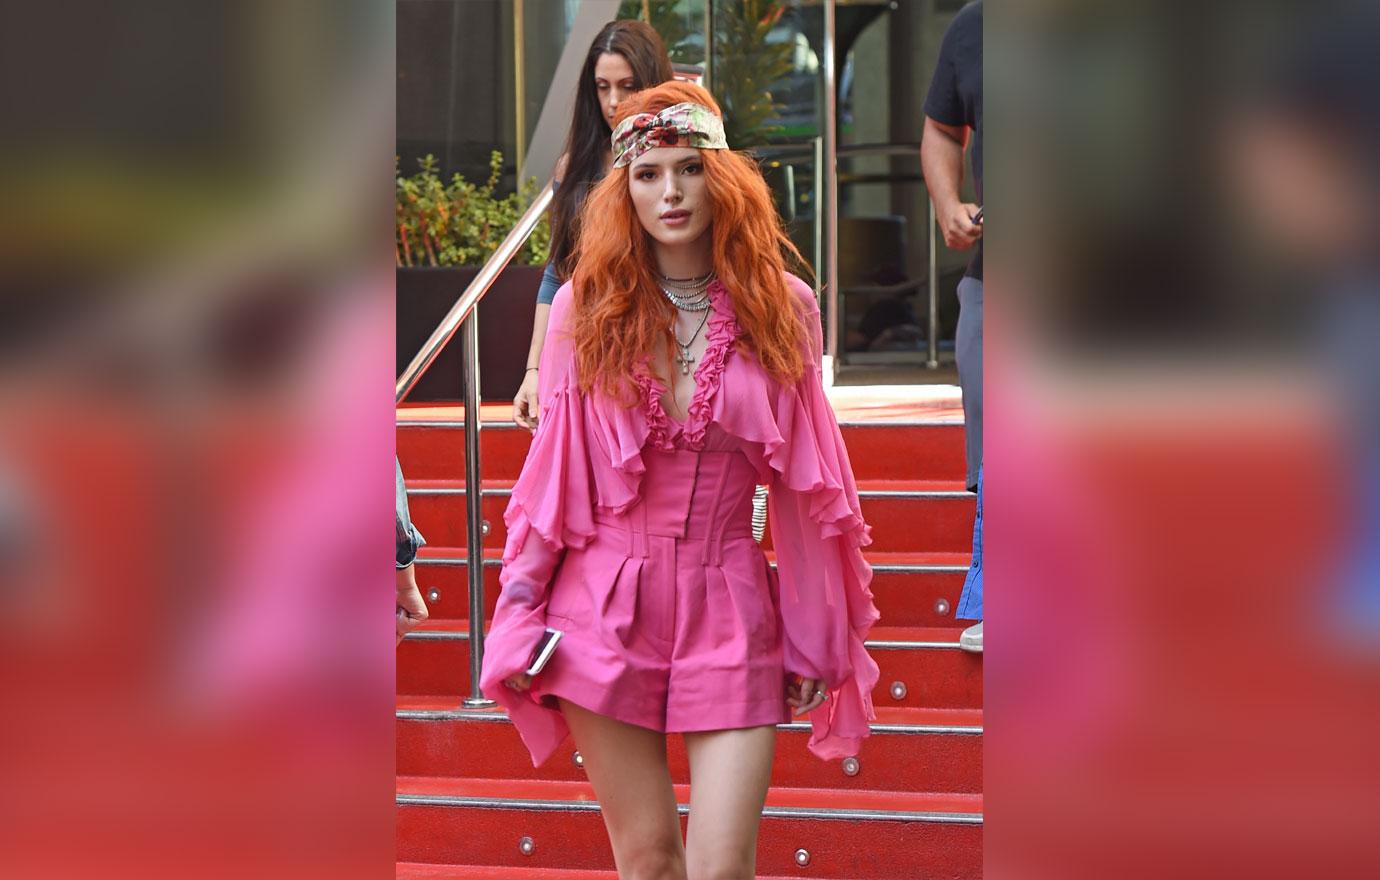 Bella Thorne Struts In A Bright Pink Outfit To Promote 'I Still See You'